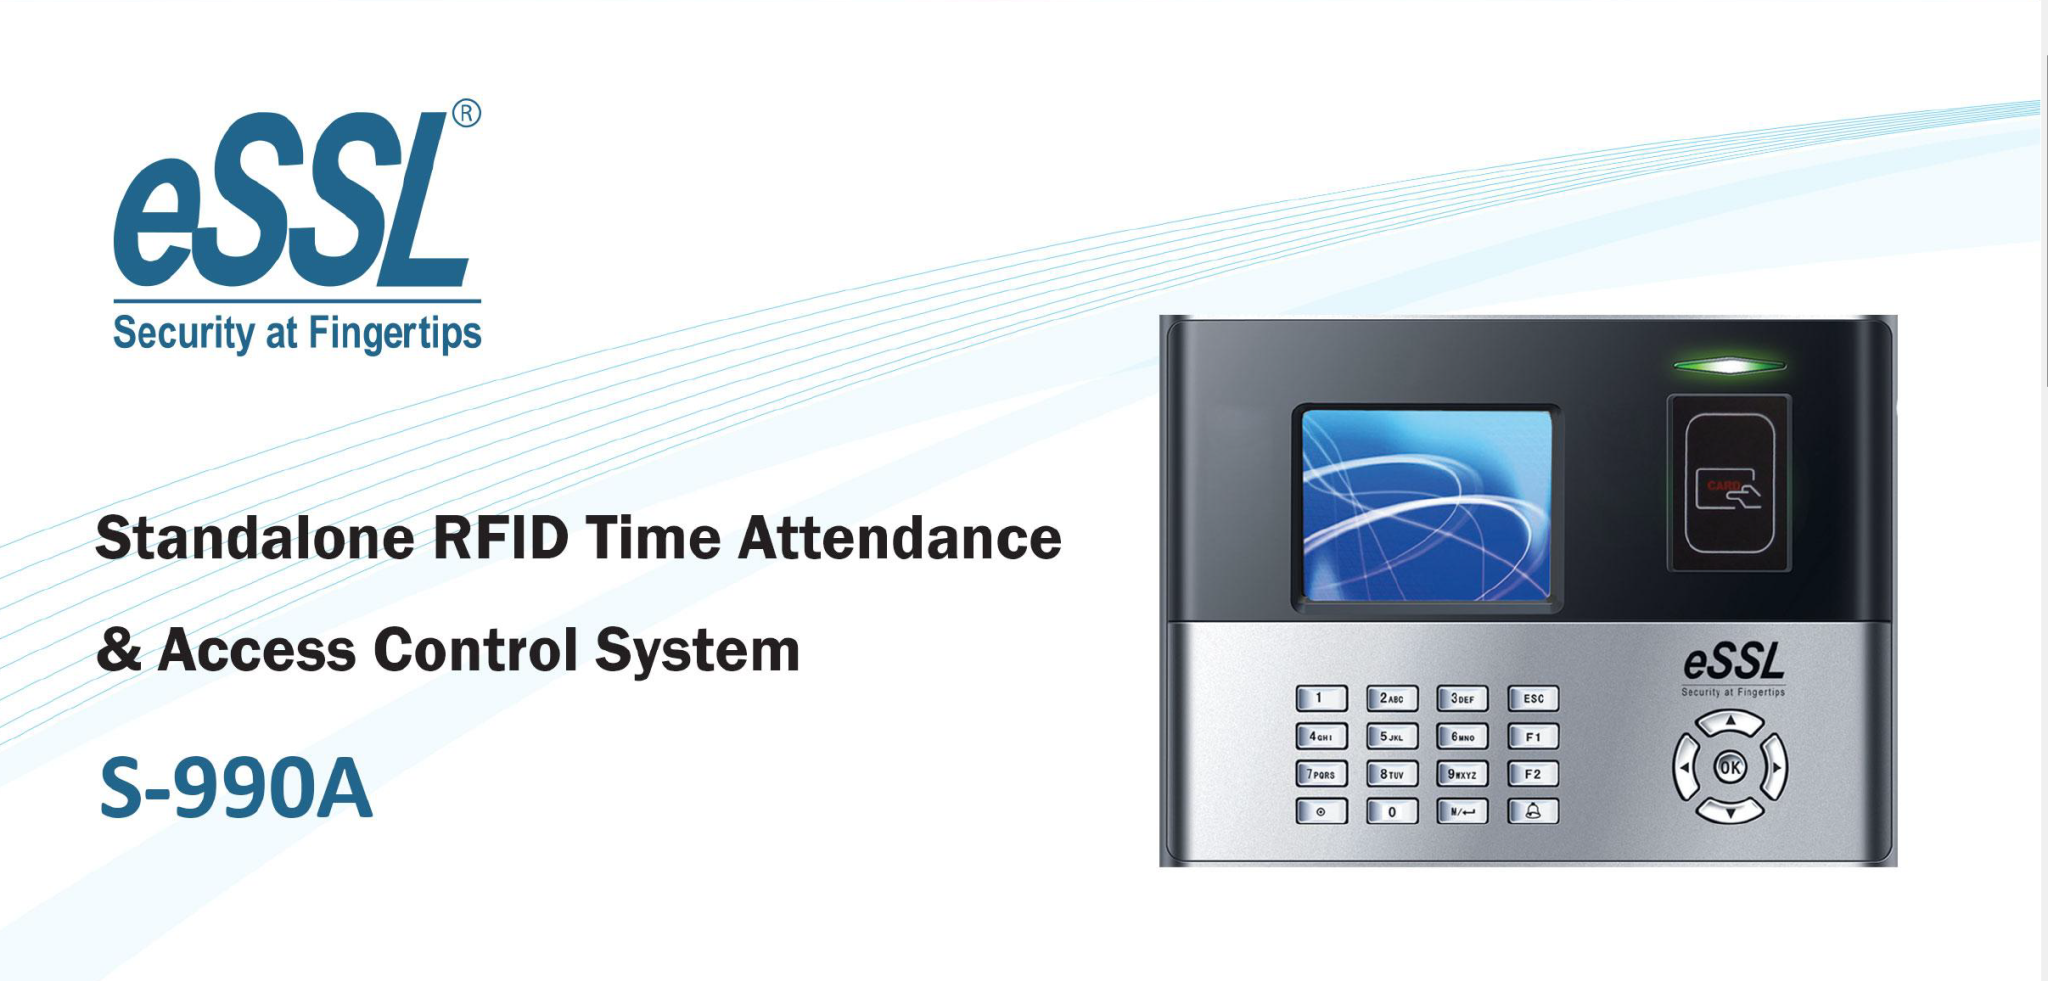 RFID Card-Based Attendance and Access Control System with Advanced Features